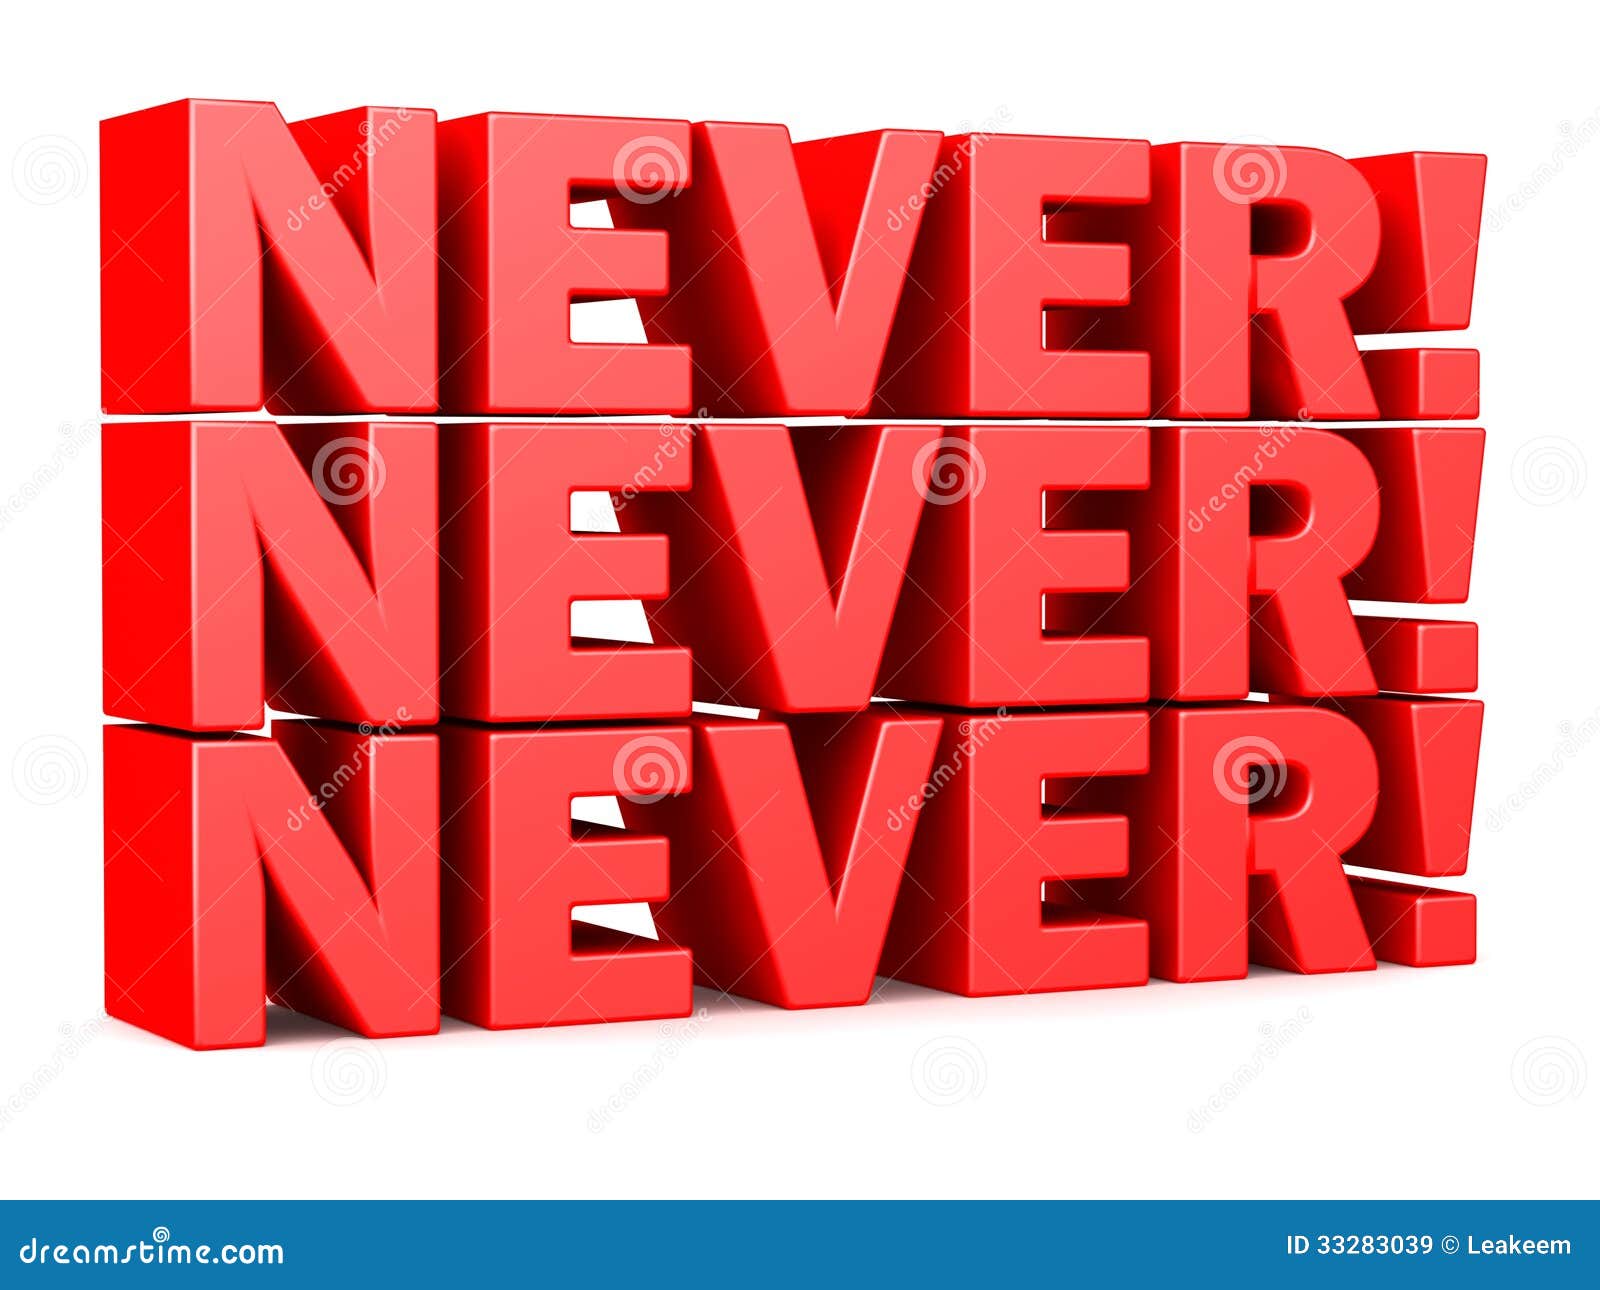 never! never! never! words red 3d lettering